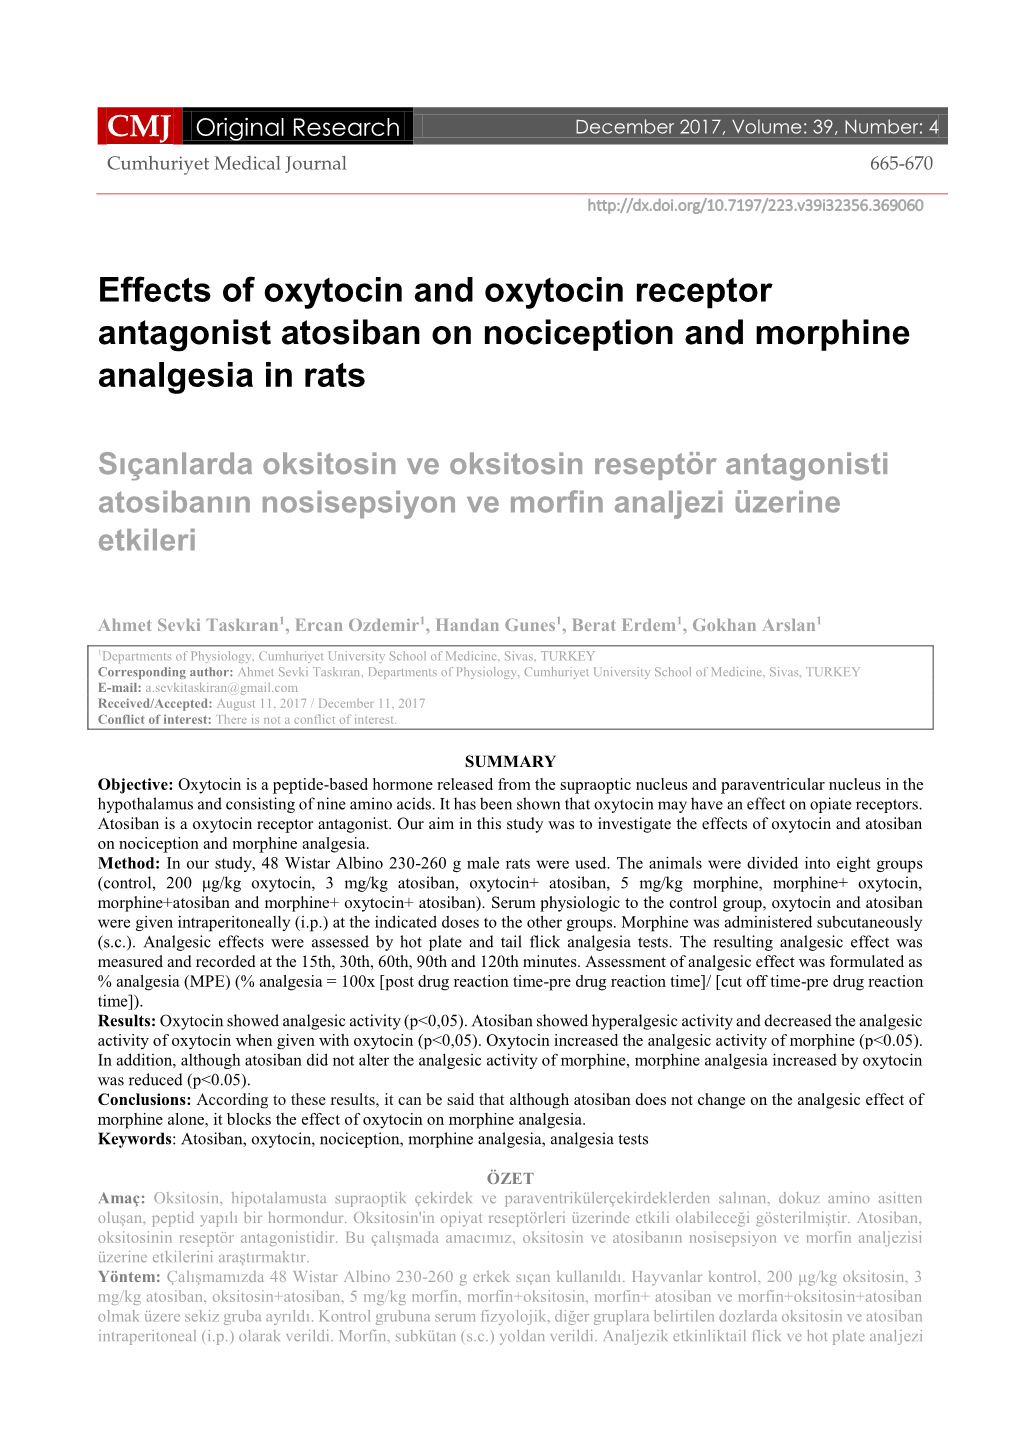 Effects of Oxytocin and Oxytocin Receptor Antagonist Atosiban on Nociception and Morphine Analgesia in Rats